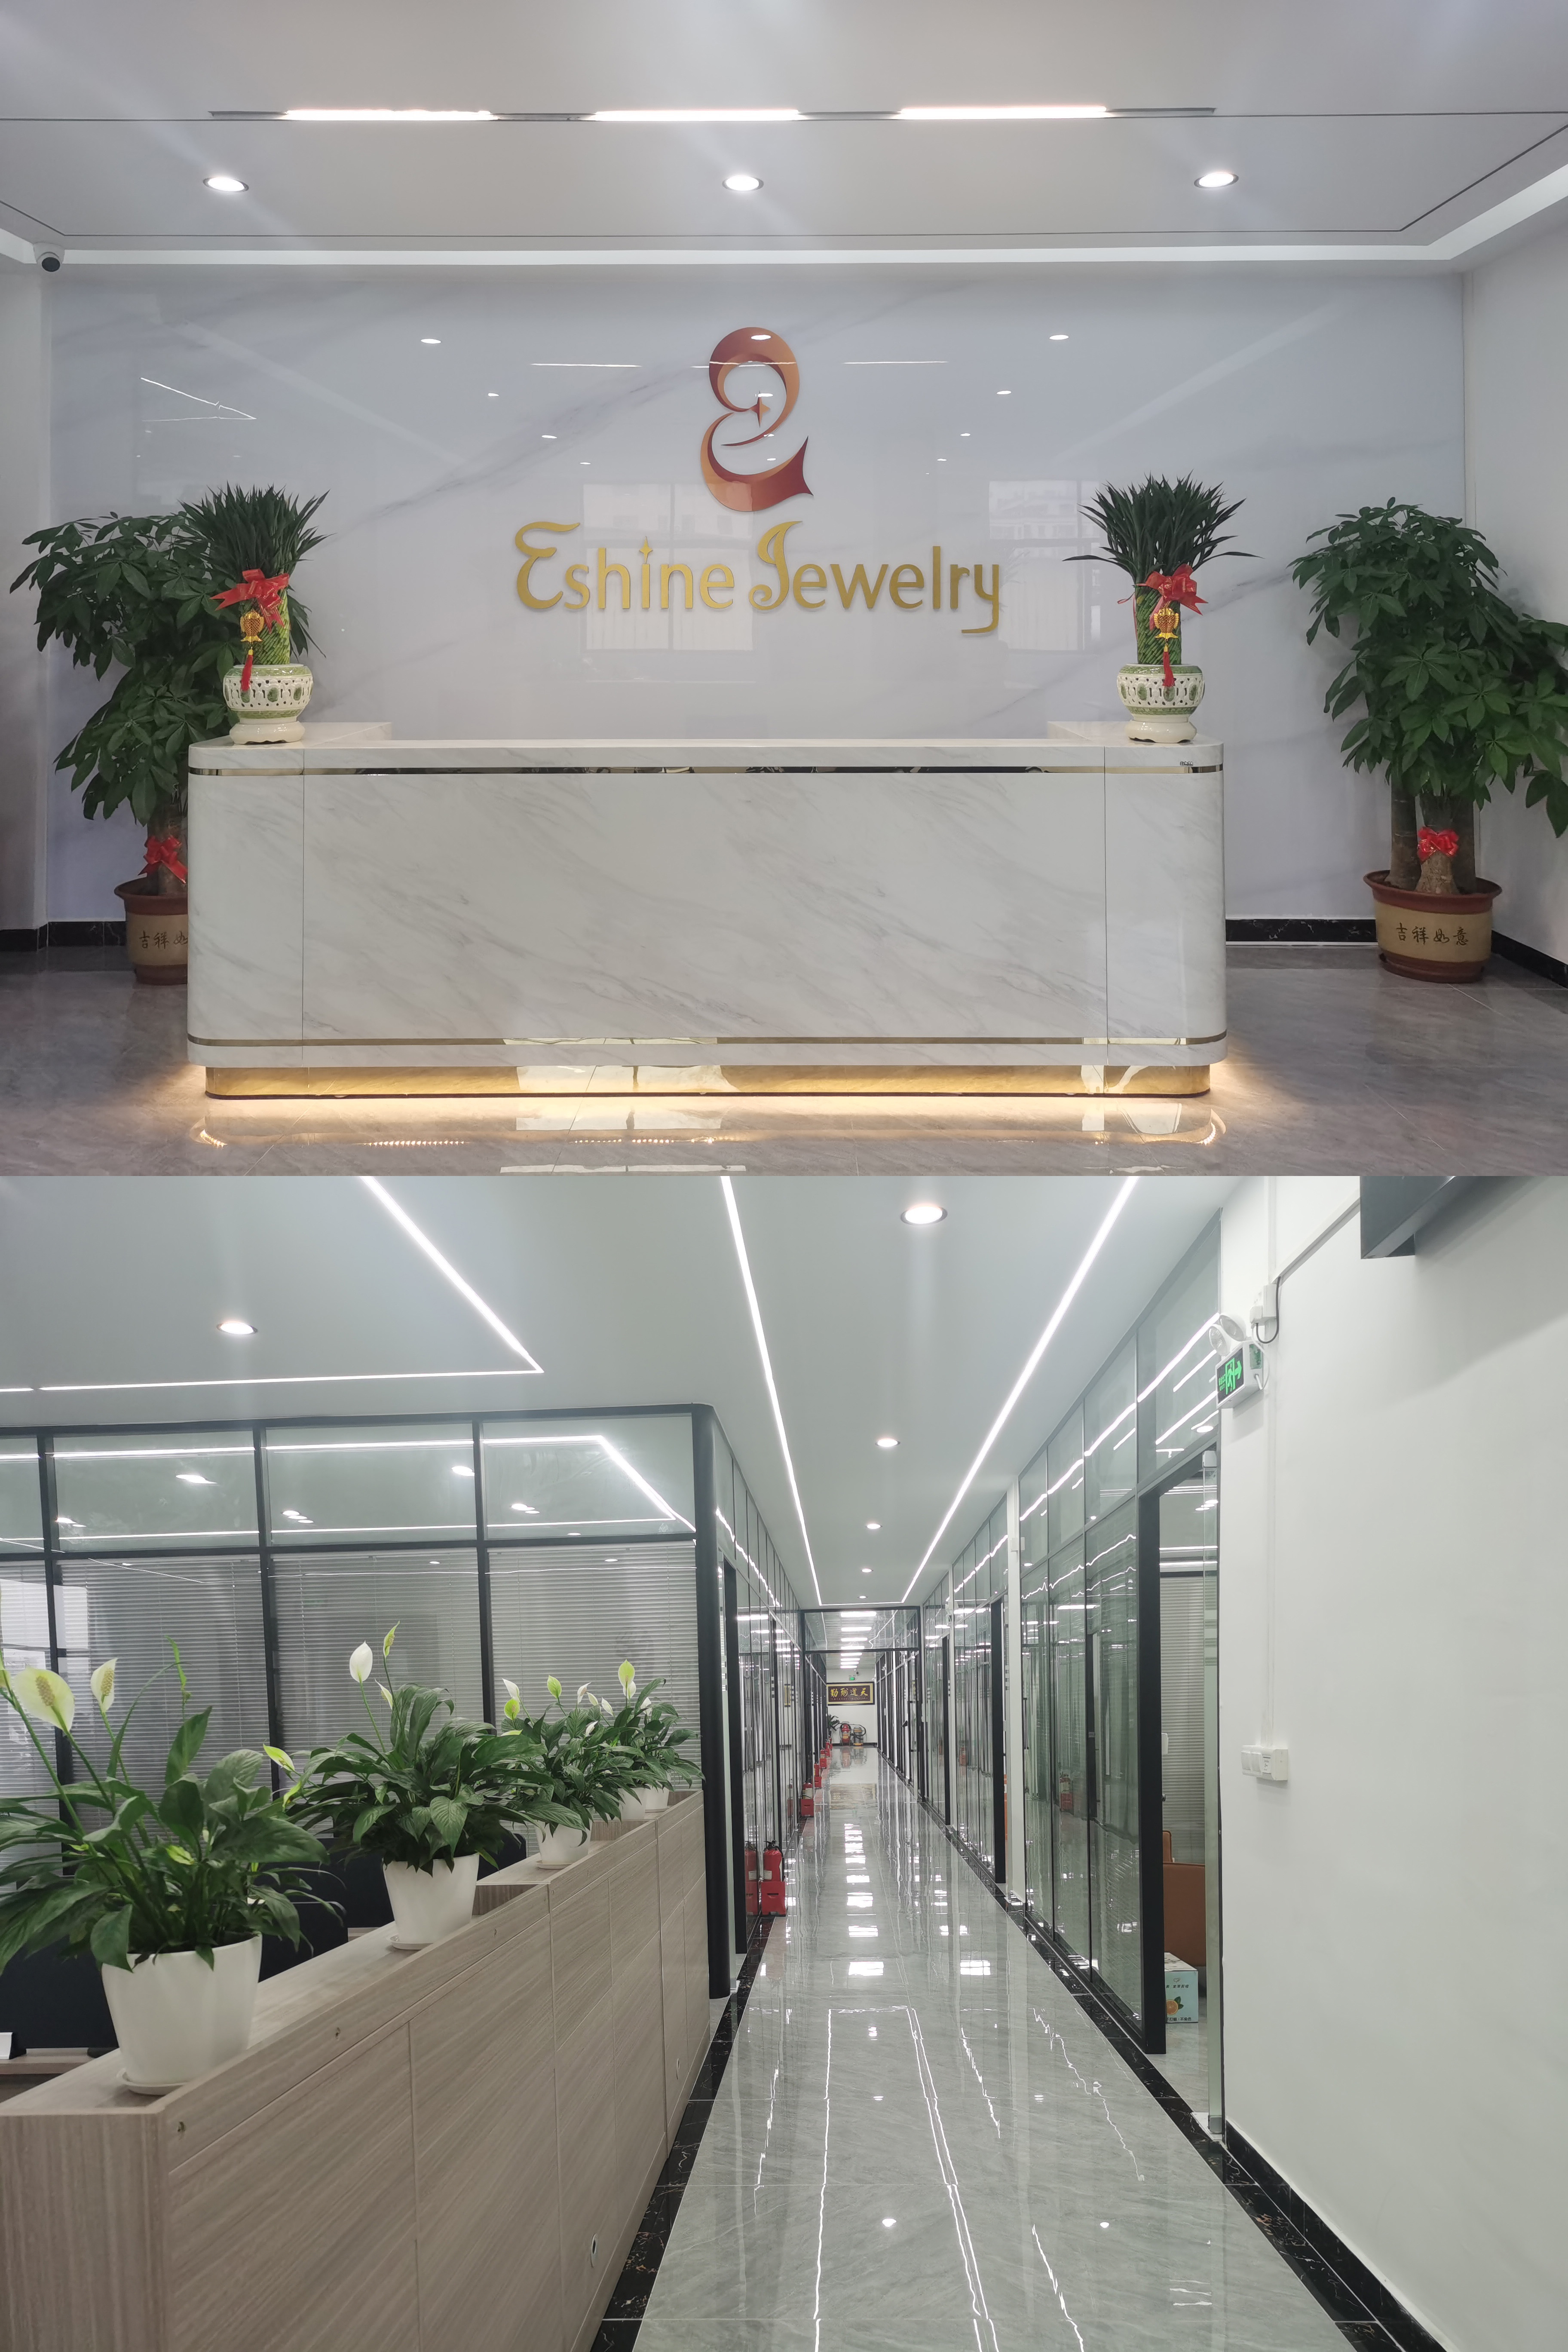 About About Eshine Jewelry 0